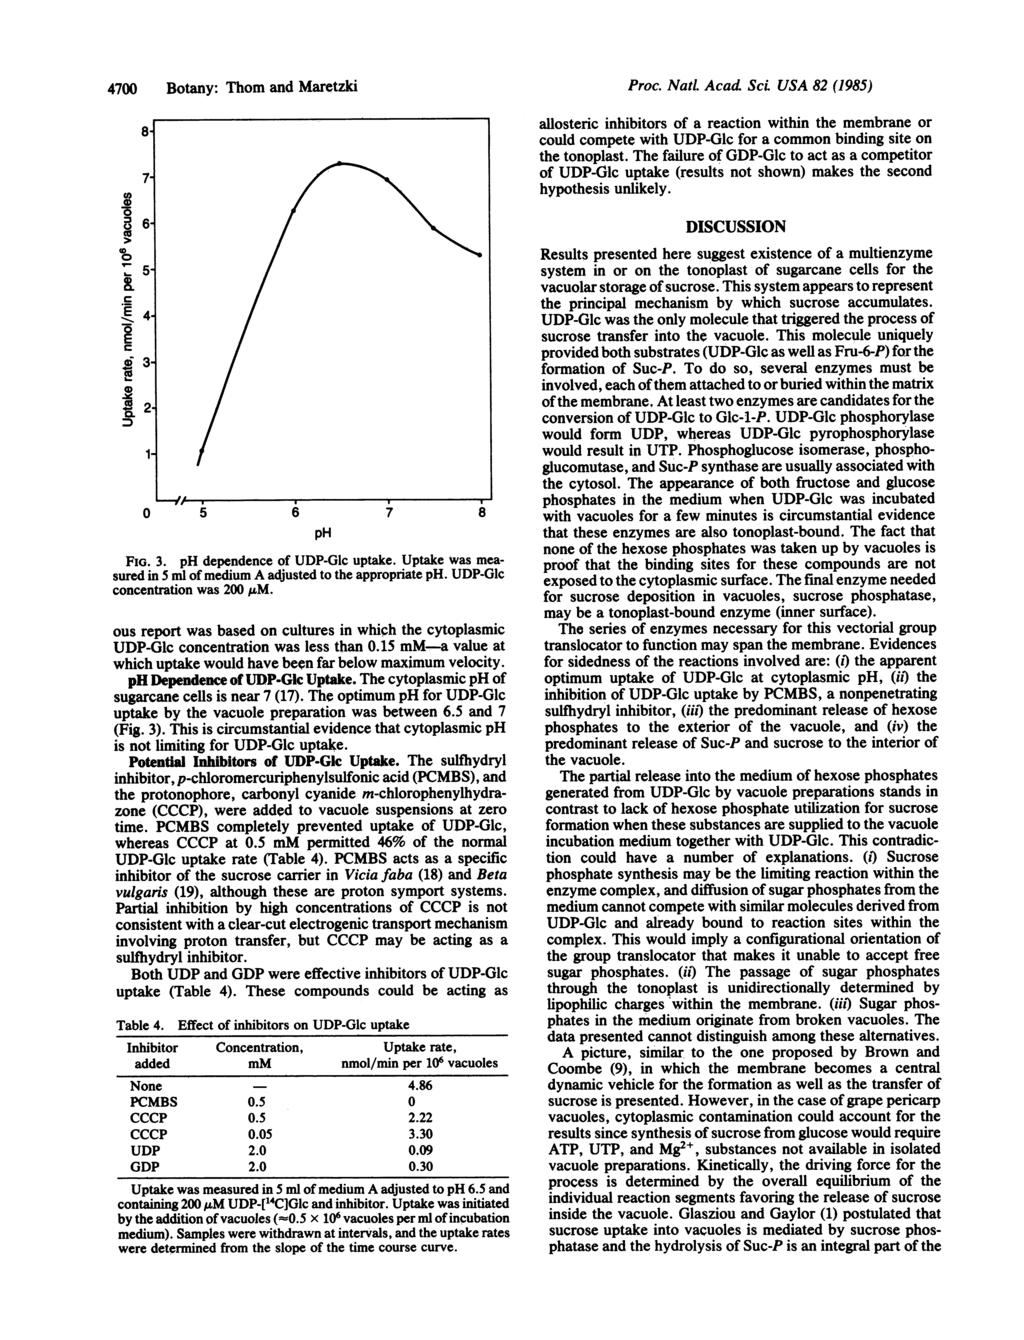 47 Botany: Thomand Maretzki co E 8-7- ID 3-2- / 5 6 7 8 ph FIG. 3. ph dependence of UDP-Glc uptake. Uptake was measured in S ml of medium A adjusted to the appropriate ph.